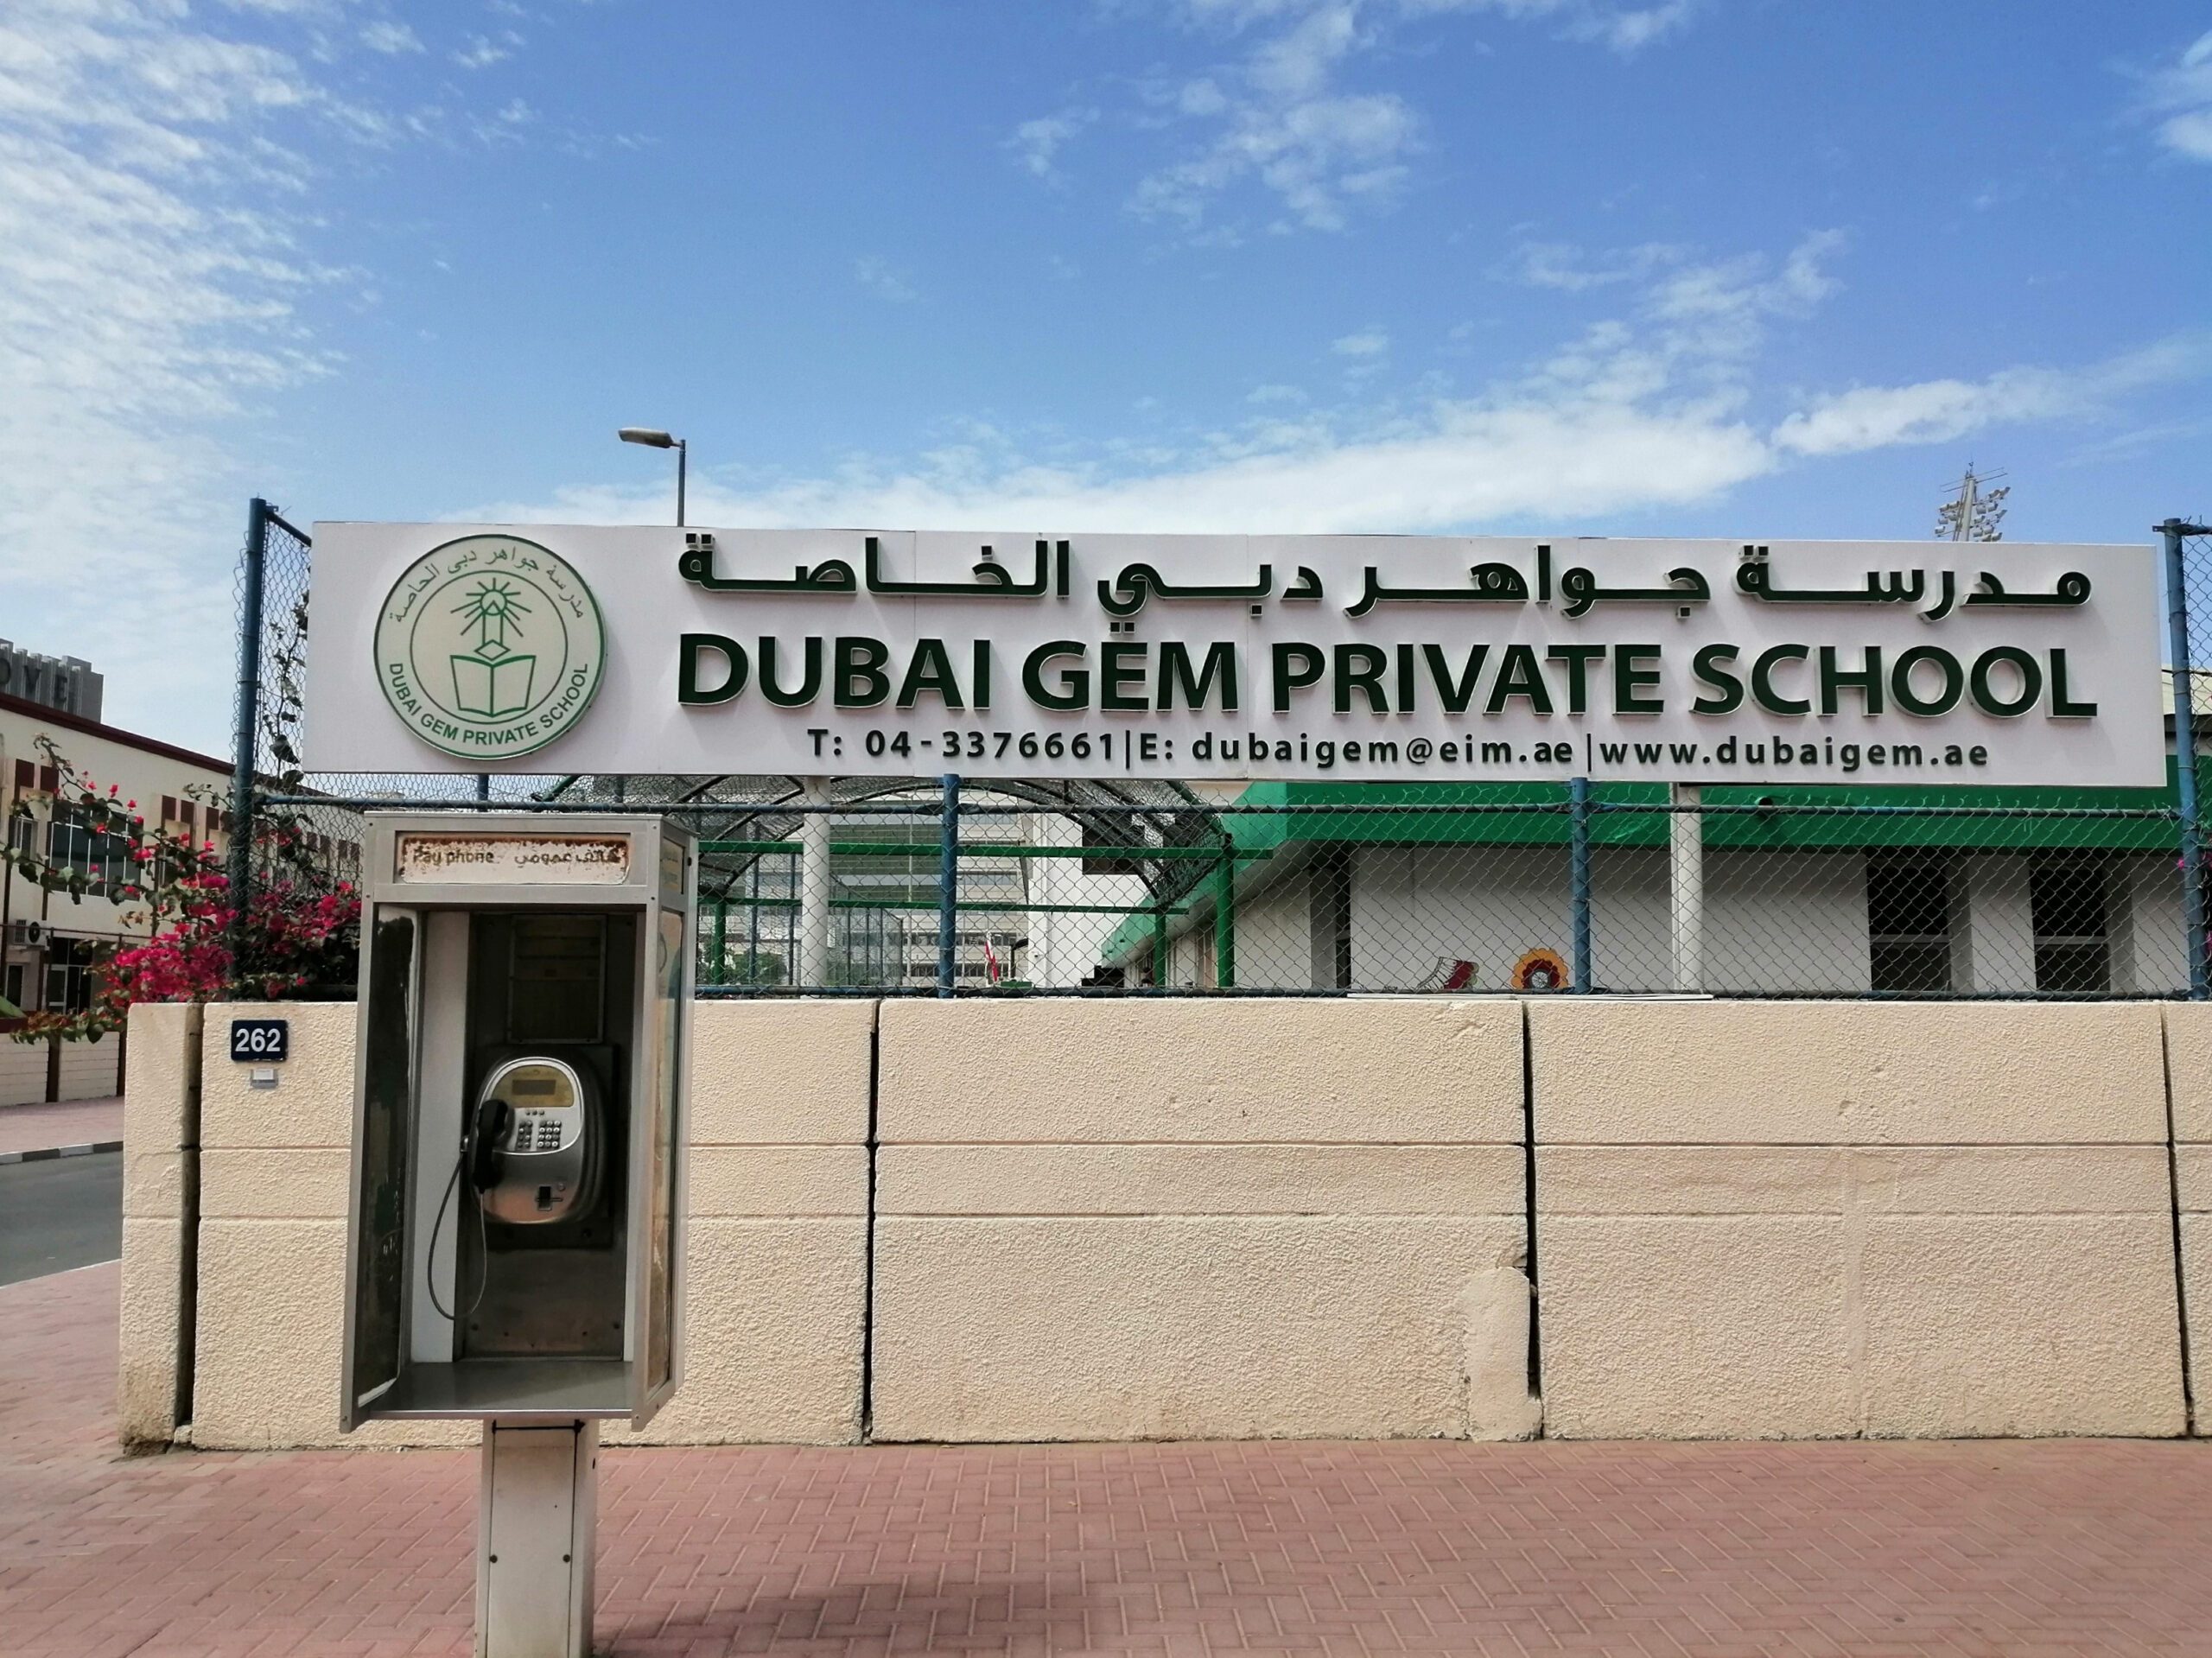 GEMS Education was founded in 1959 with a single school in Dubai and is now a global education colossus that has partnered with the private equity firm CVC and Fajr Capital